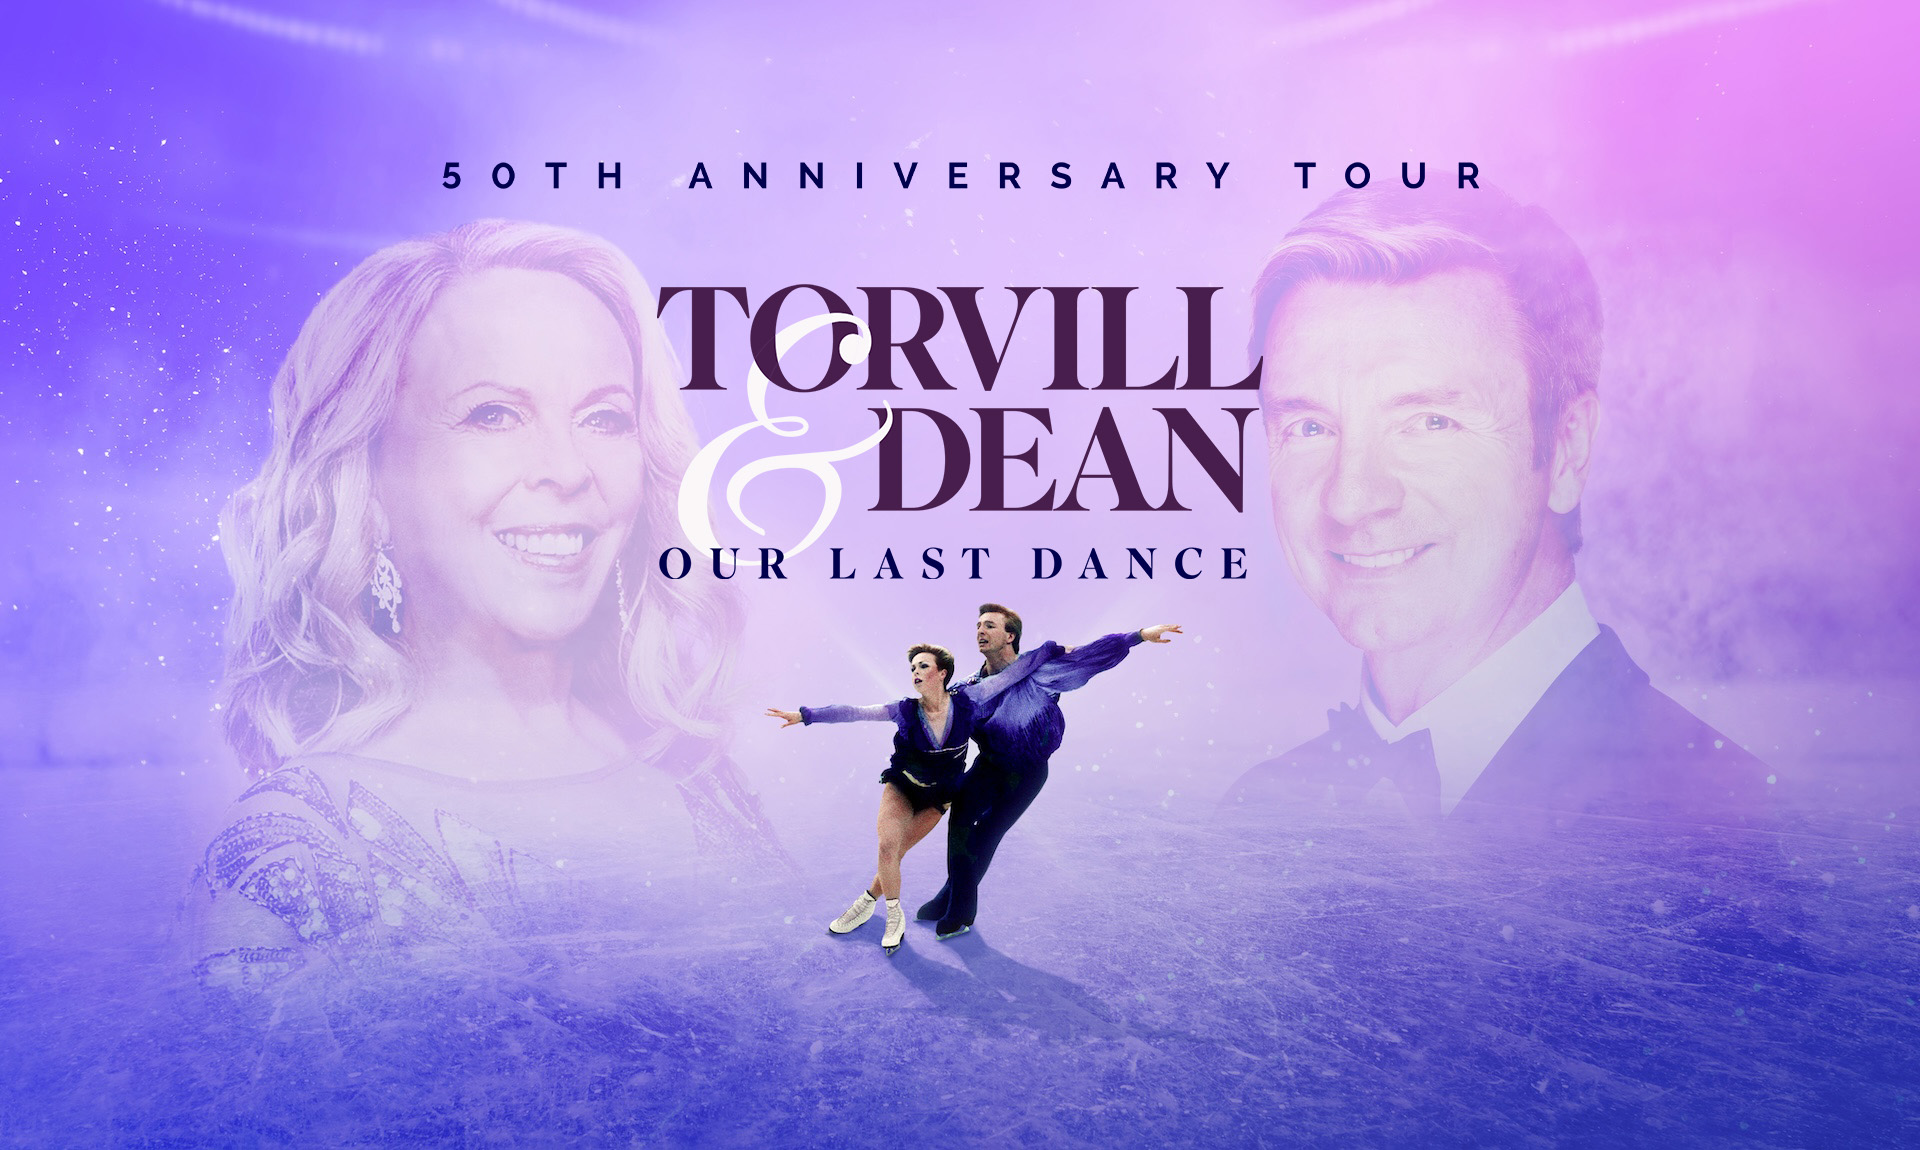 Torvill and Dean Torvill and Dean are English ice dancers and former